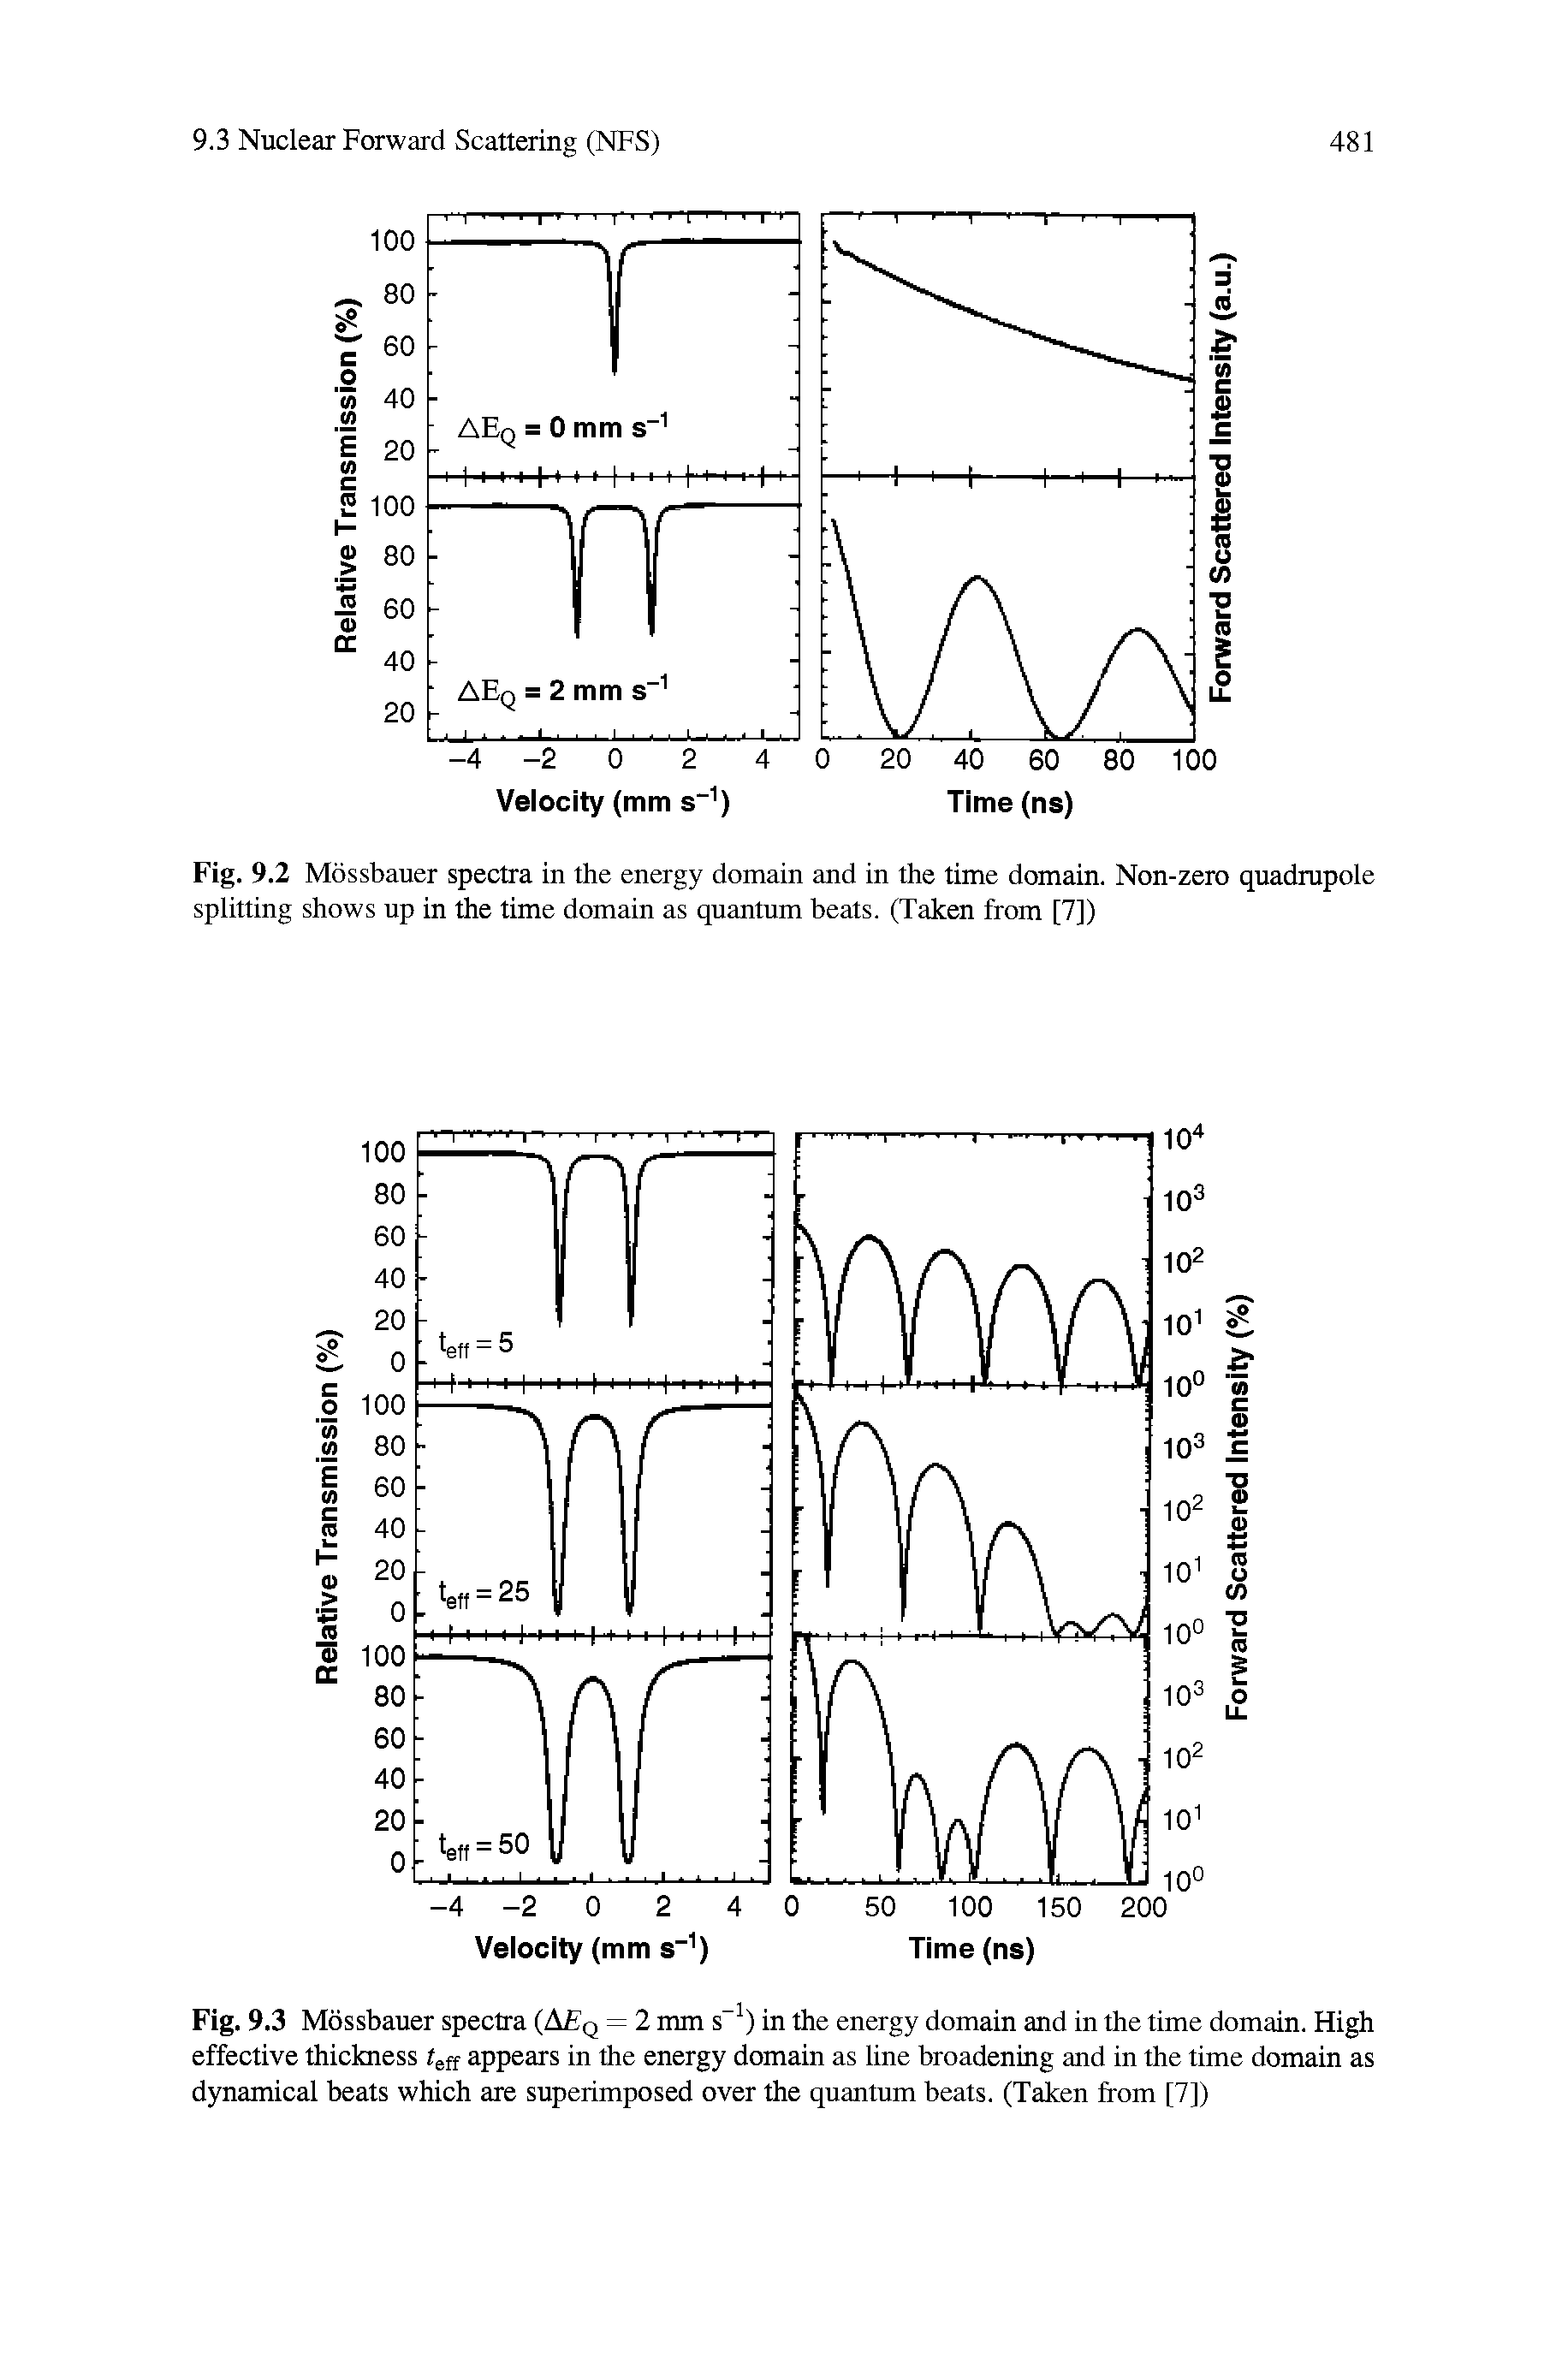 Fig. 9.3 Mossbauer spectra (A q = 2 mm s ) in the energy domain and in the time domain. High effective thickness t ff appears in the energy domain as line broadening and in the time domain as dynamical beats which are superimposed over the quantum beats. (Taken from [7])...